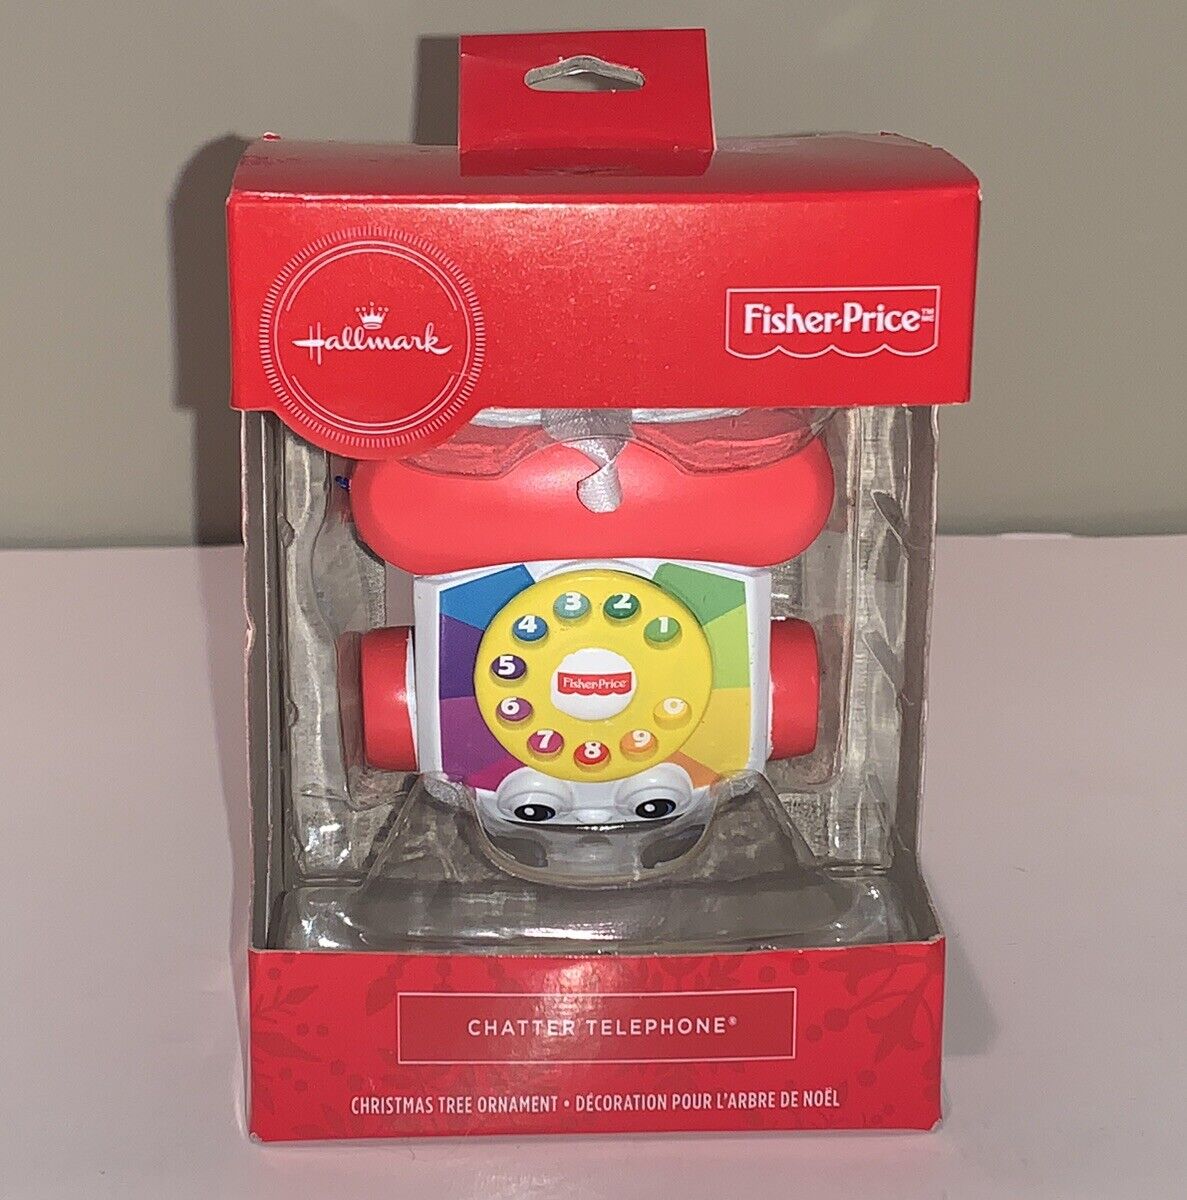 Hallmark Chatter Telephone Christmas Phone Ornament Fisher Price Collectable NIP